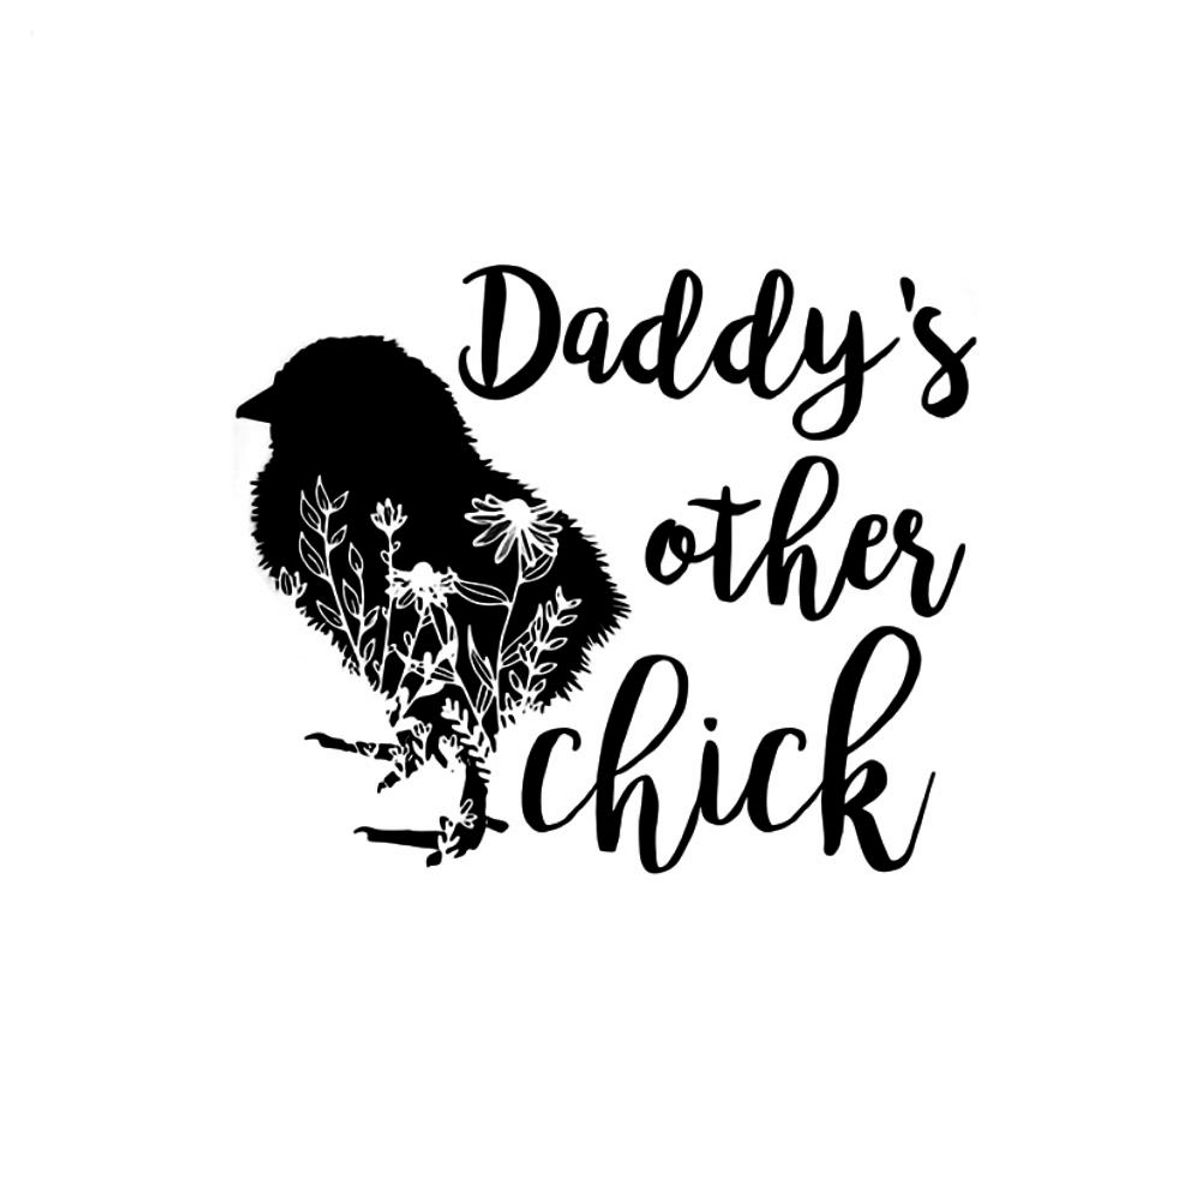 Kids Daddy's Other Chick Baby Shirt